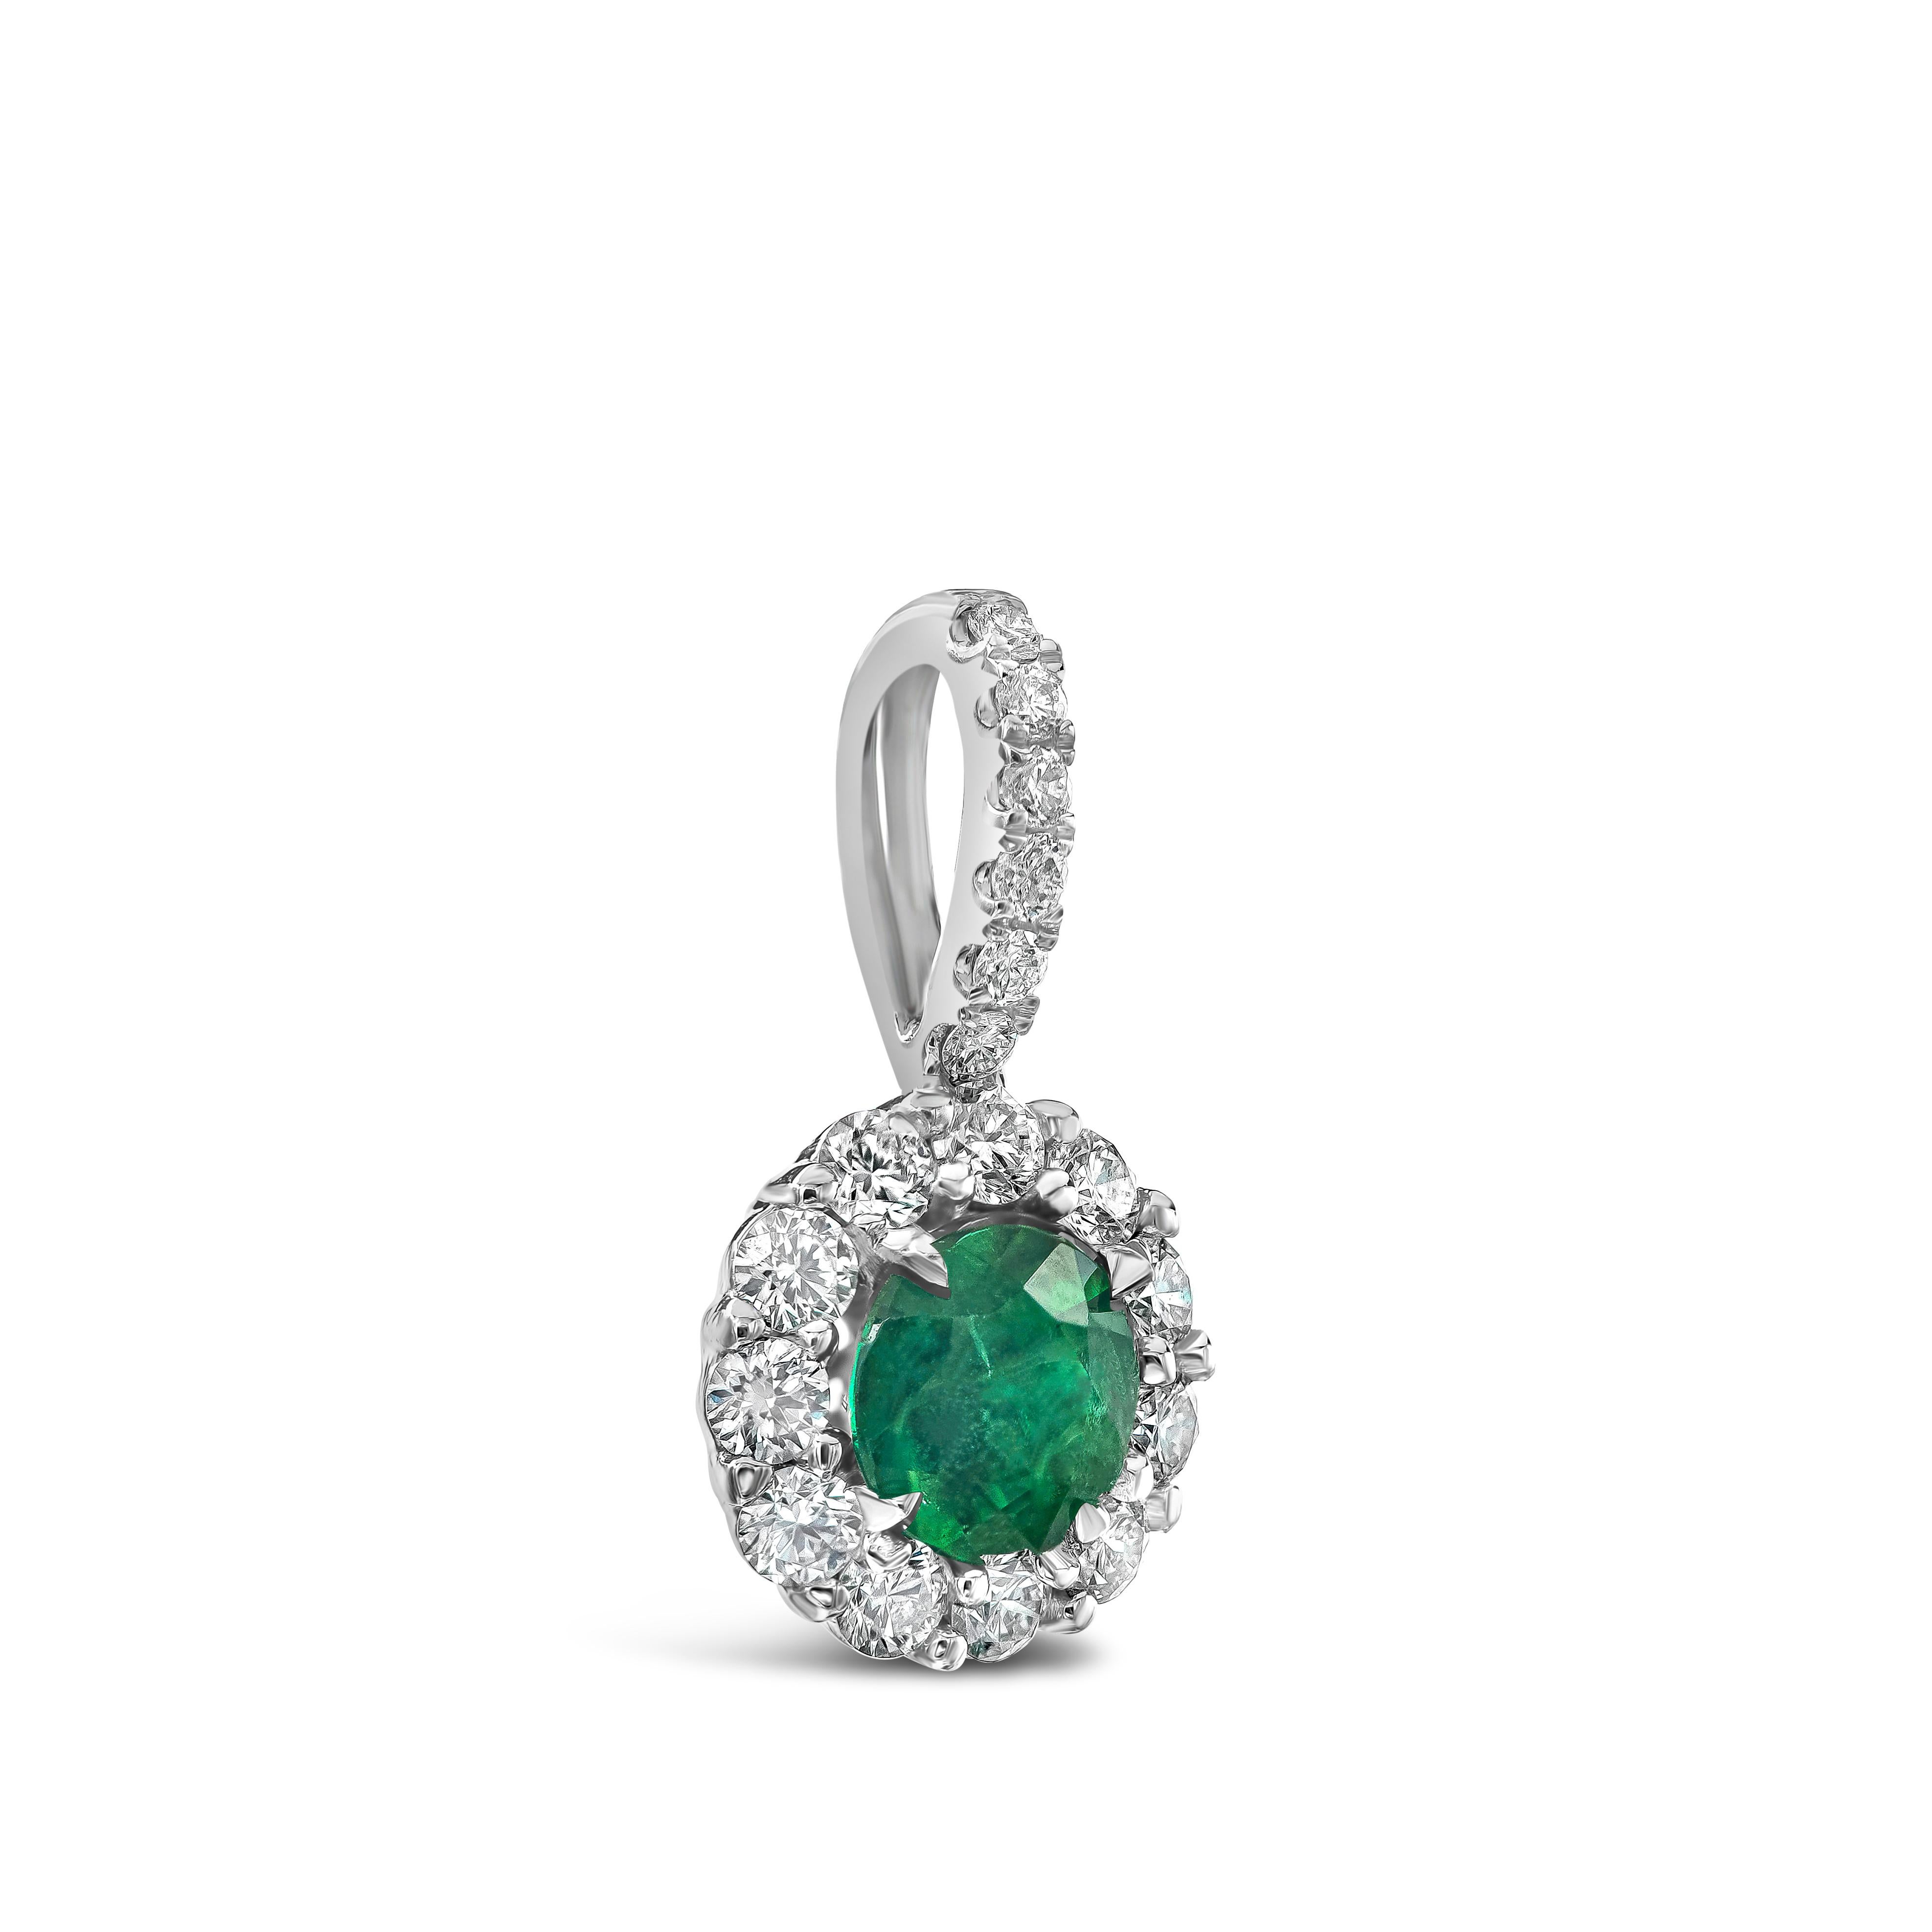 A simple and versatile pendant necklace showcasing a 0.33 carat round green emerald, surrounded by a single row of round brilliant diamonds. Suspended on a diamond encrusted bale, in an 18 inch white gold chain. Diamonds weigh 0.25 carats total.